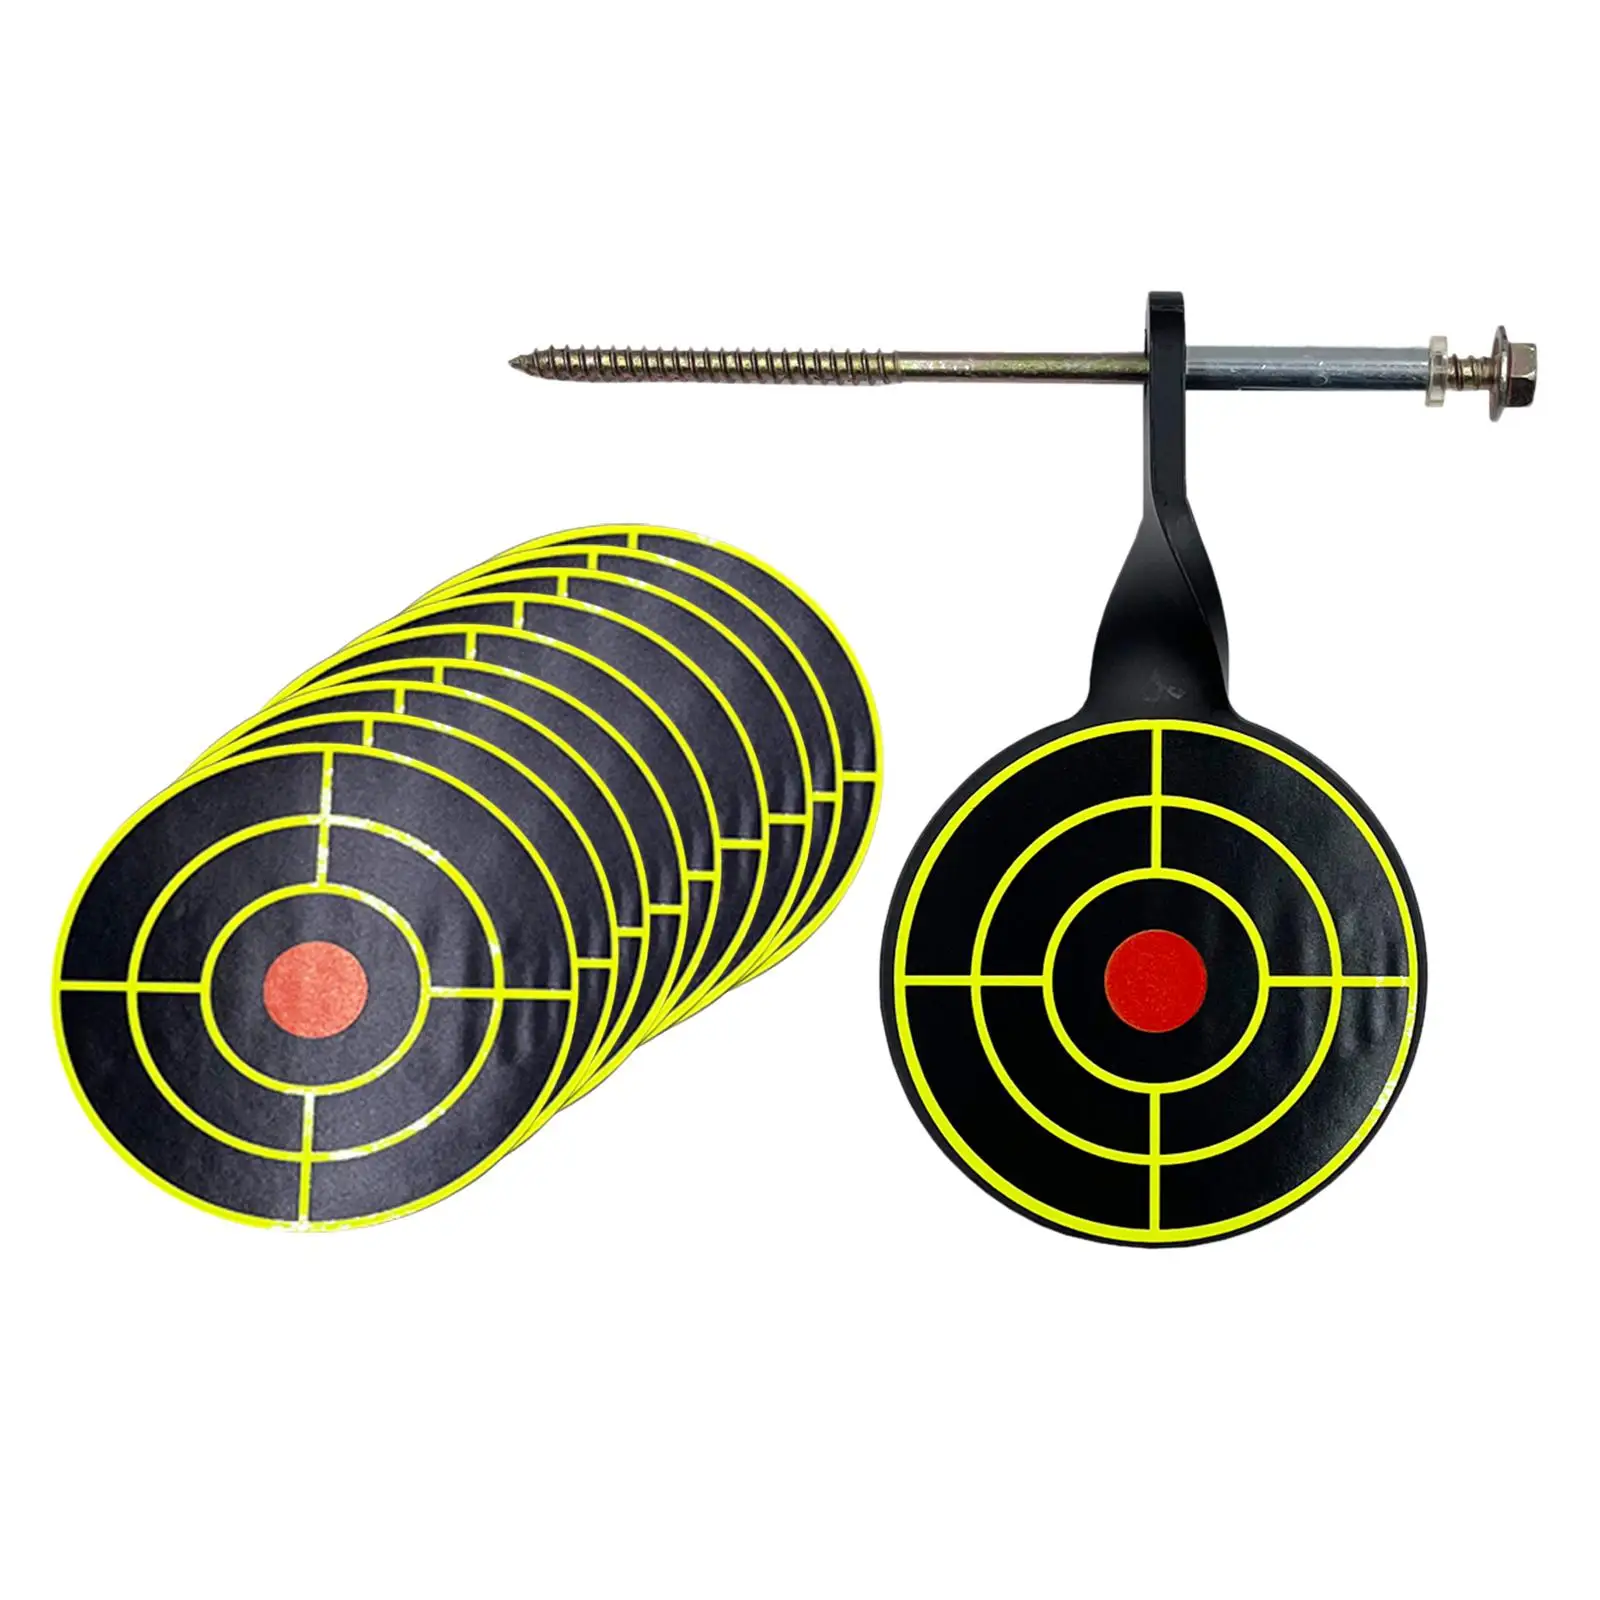 Steel Practice Target 8cm Tree Standing Target Easy Carry Rotary for Outdoor